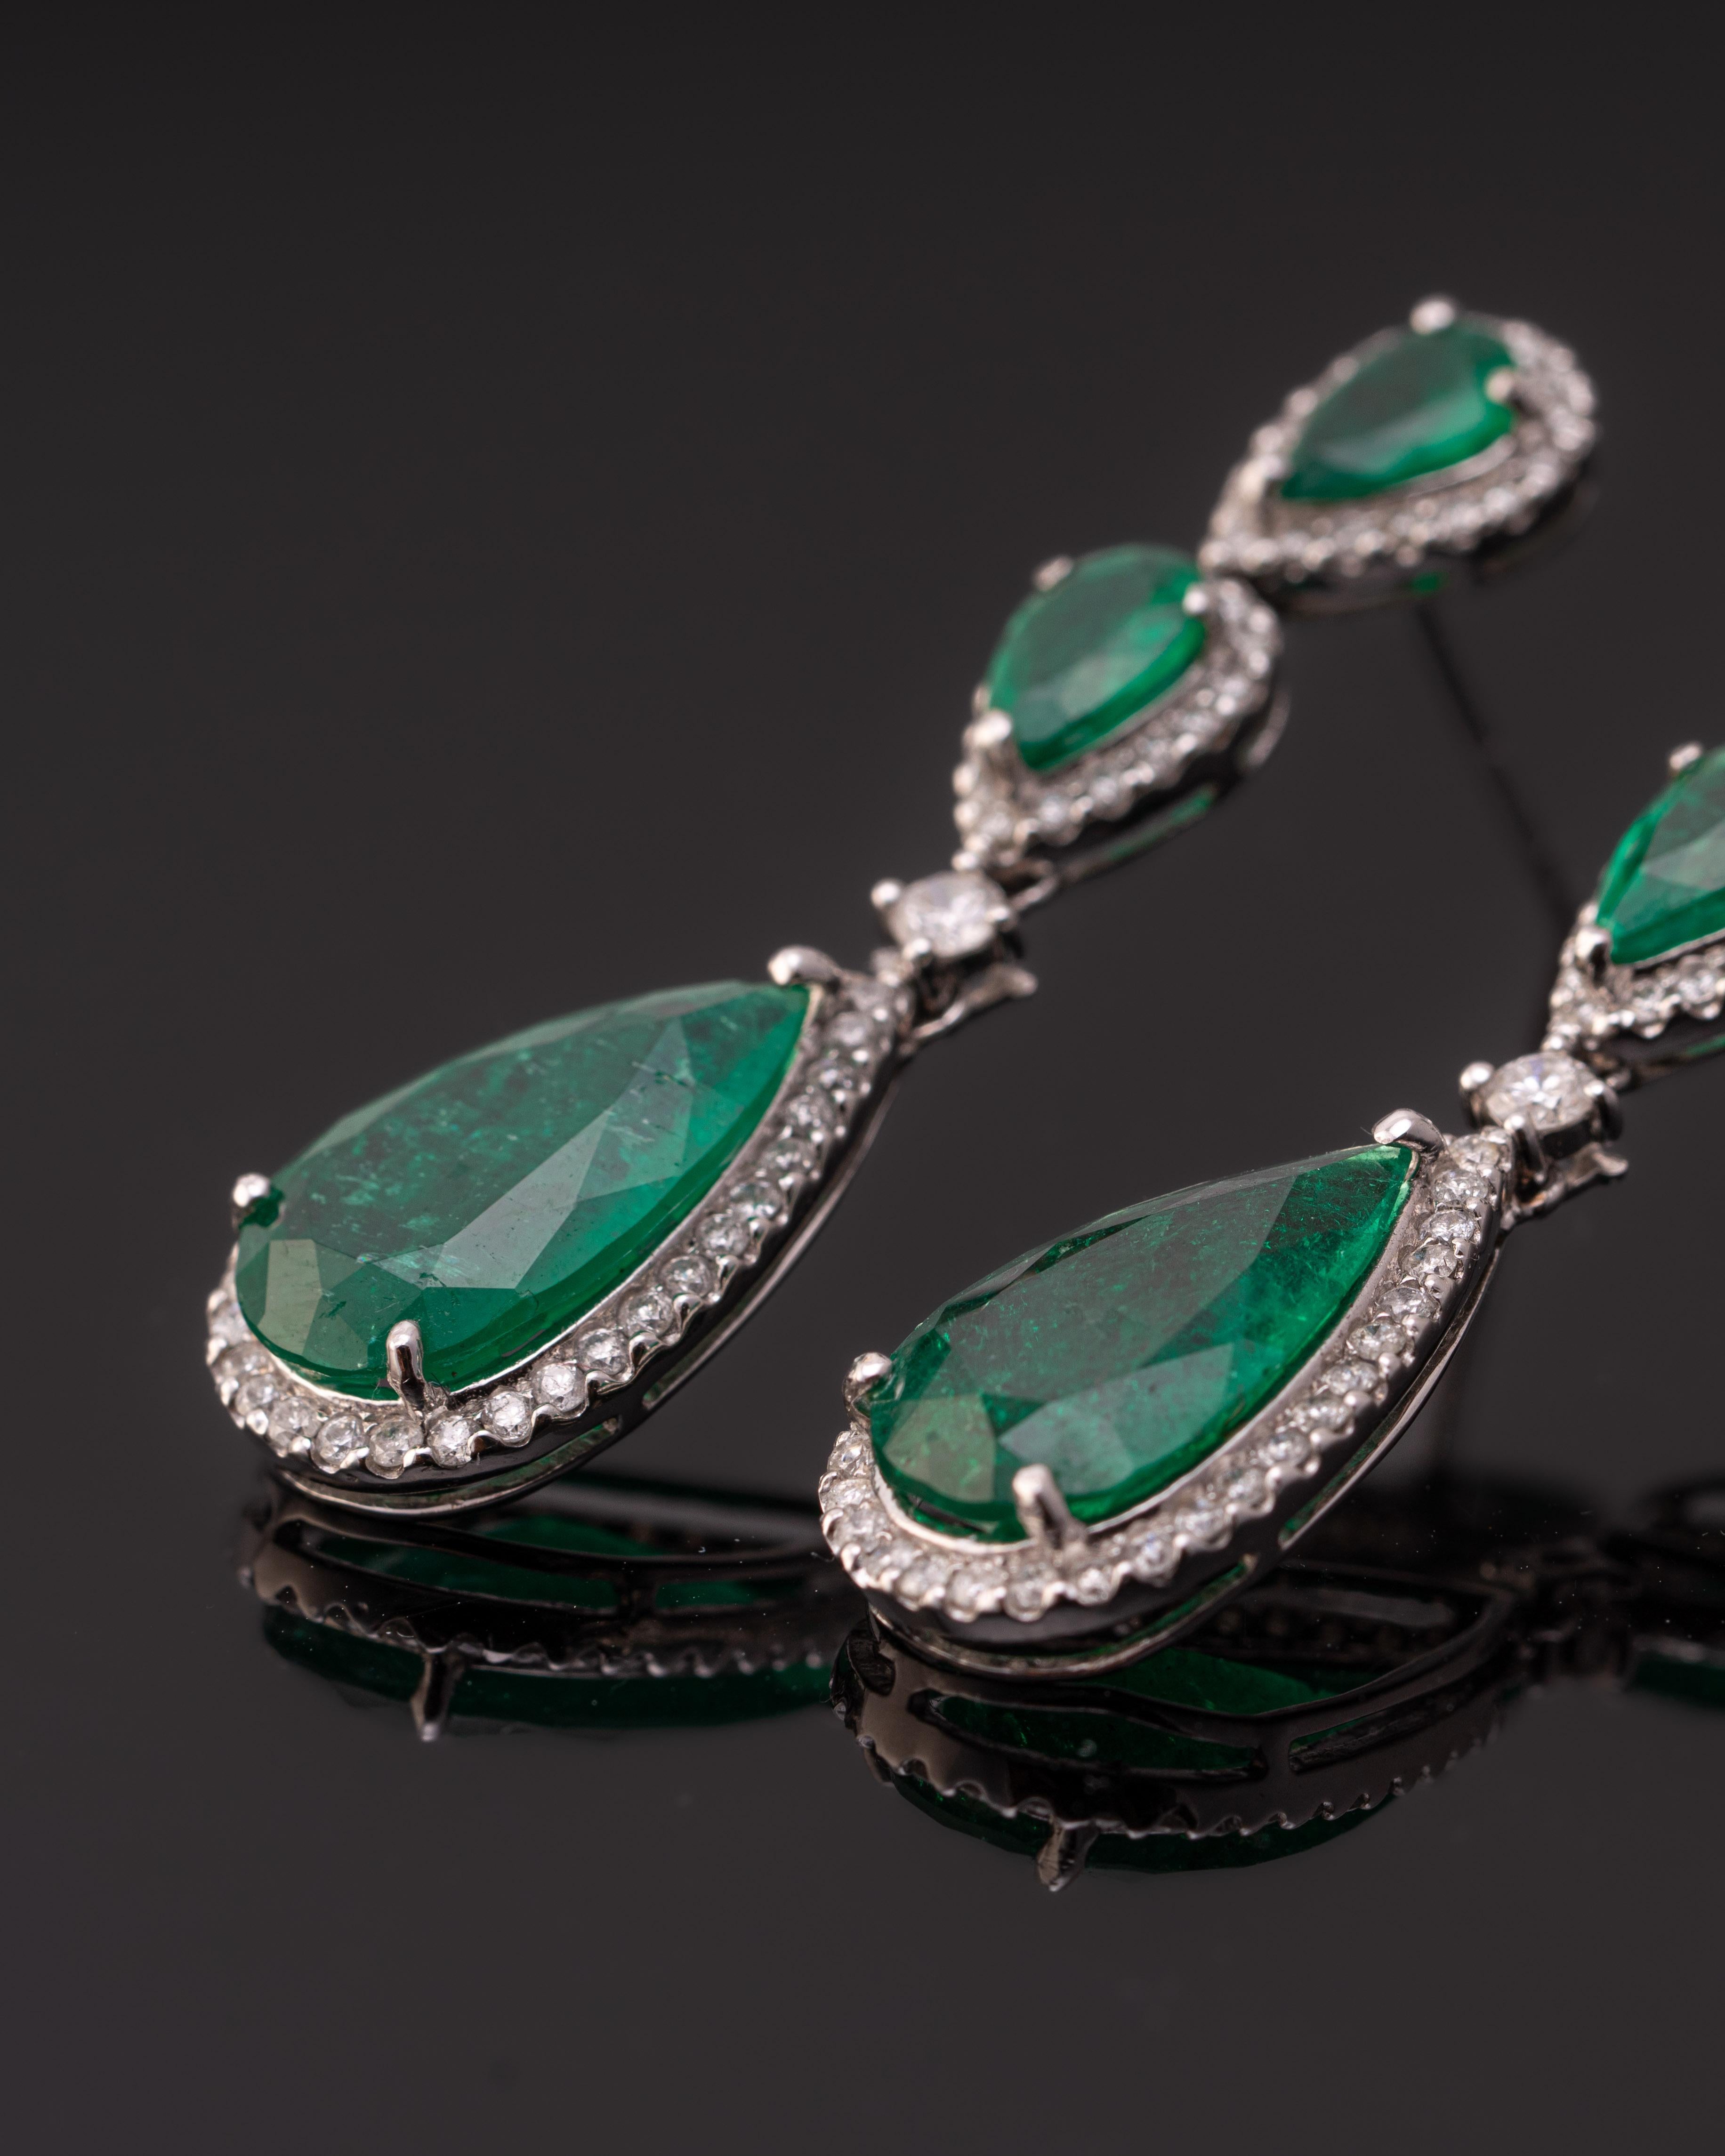 A beautiful pair of dangle earrings, with 8.68 carat pear shaped Emeralds and 1.18 carat White Diamonds, all set in 18K White Gold. The earrings come with a push-pull backing, and are around 4cm long. 
Please message for more information. 
We